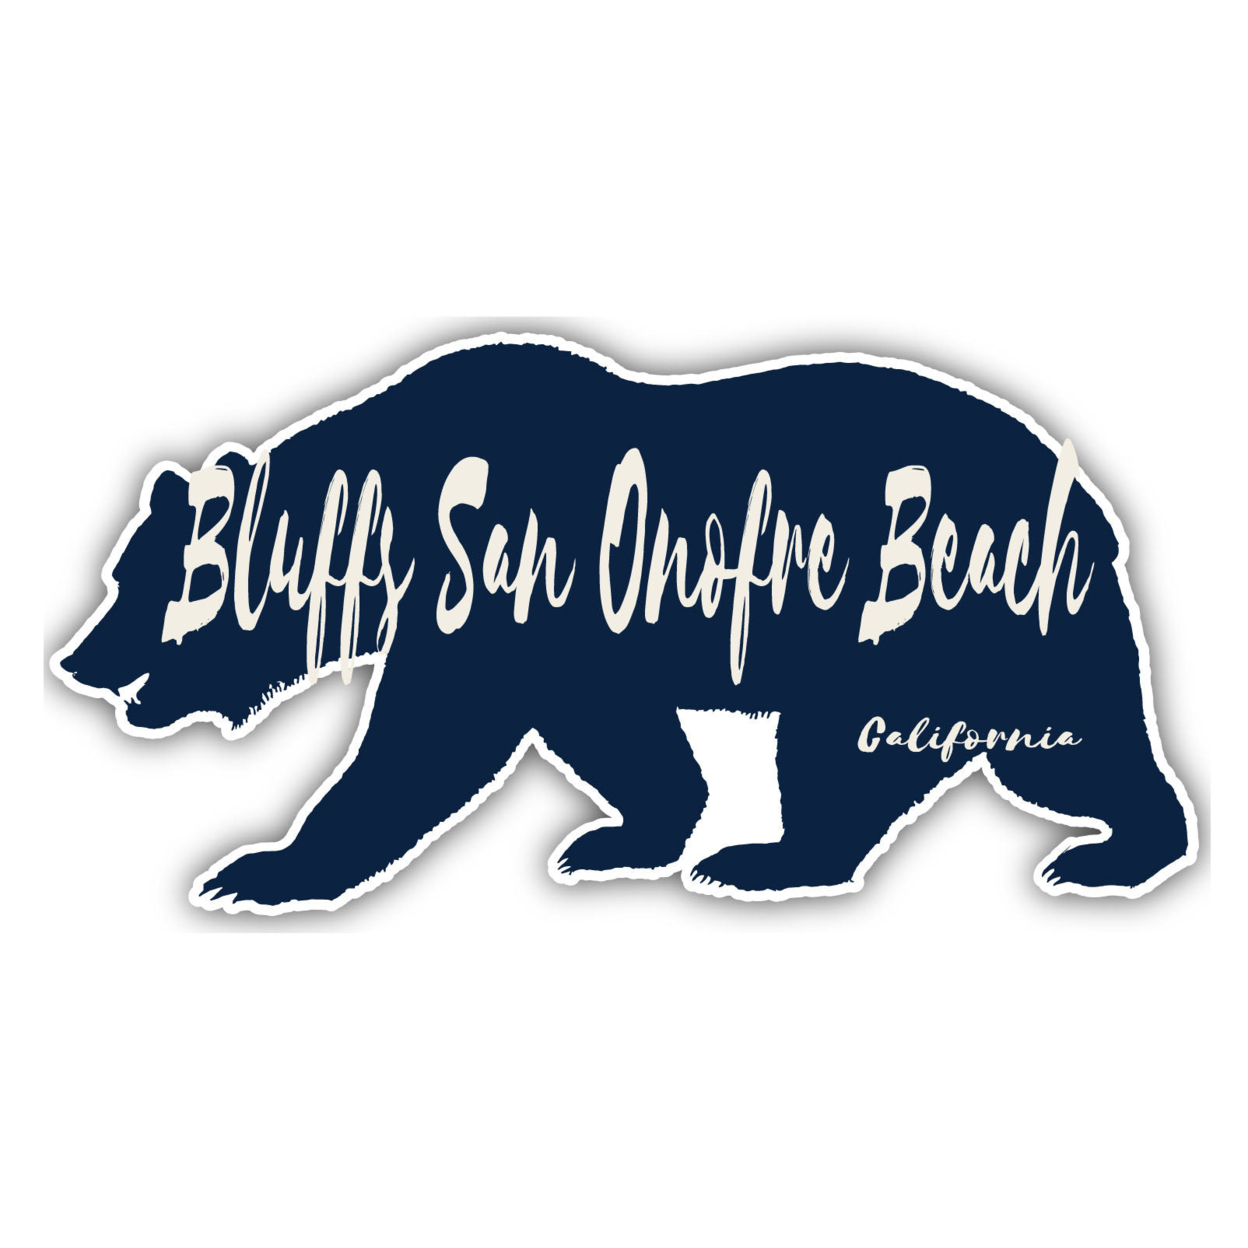 Bluffs San Onofre Beach California Souvenir Decorative Stickers (Choose Theme And Size) - 4-Pack, 10-Inch, Bear